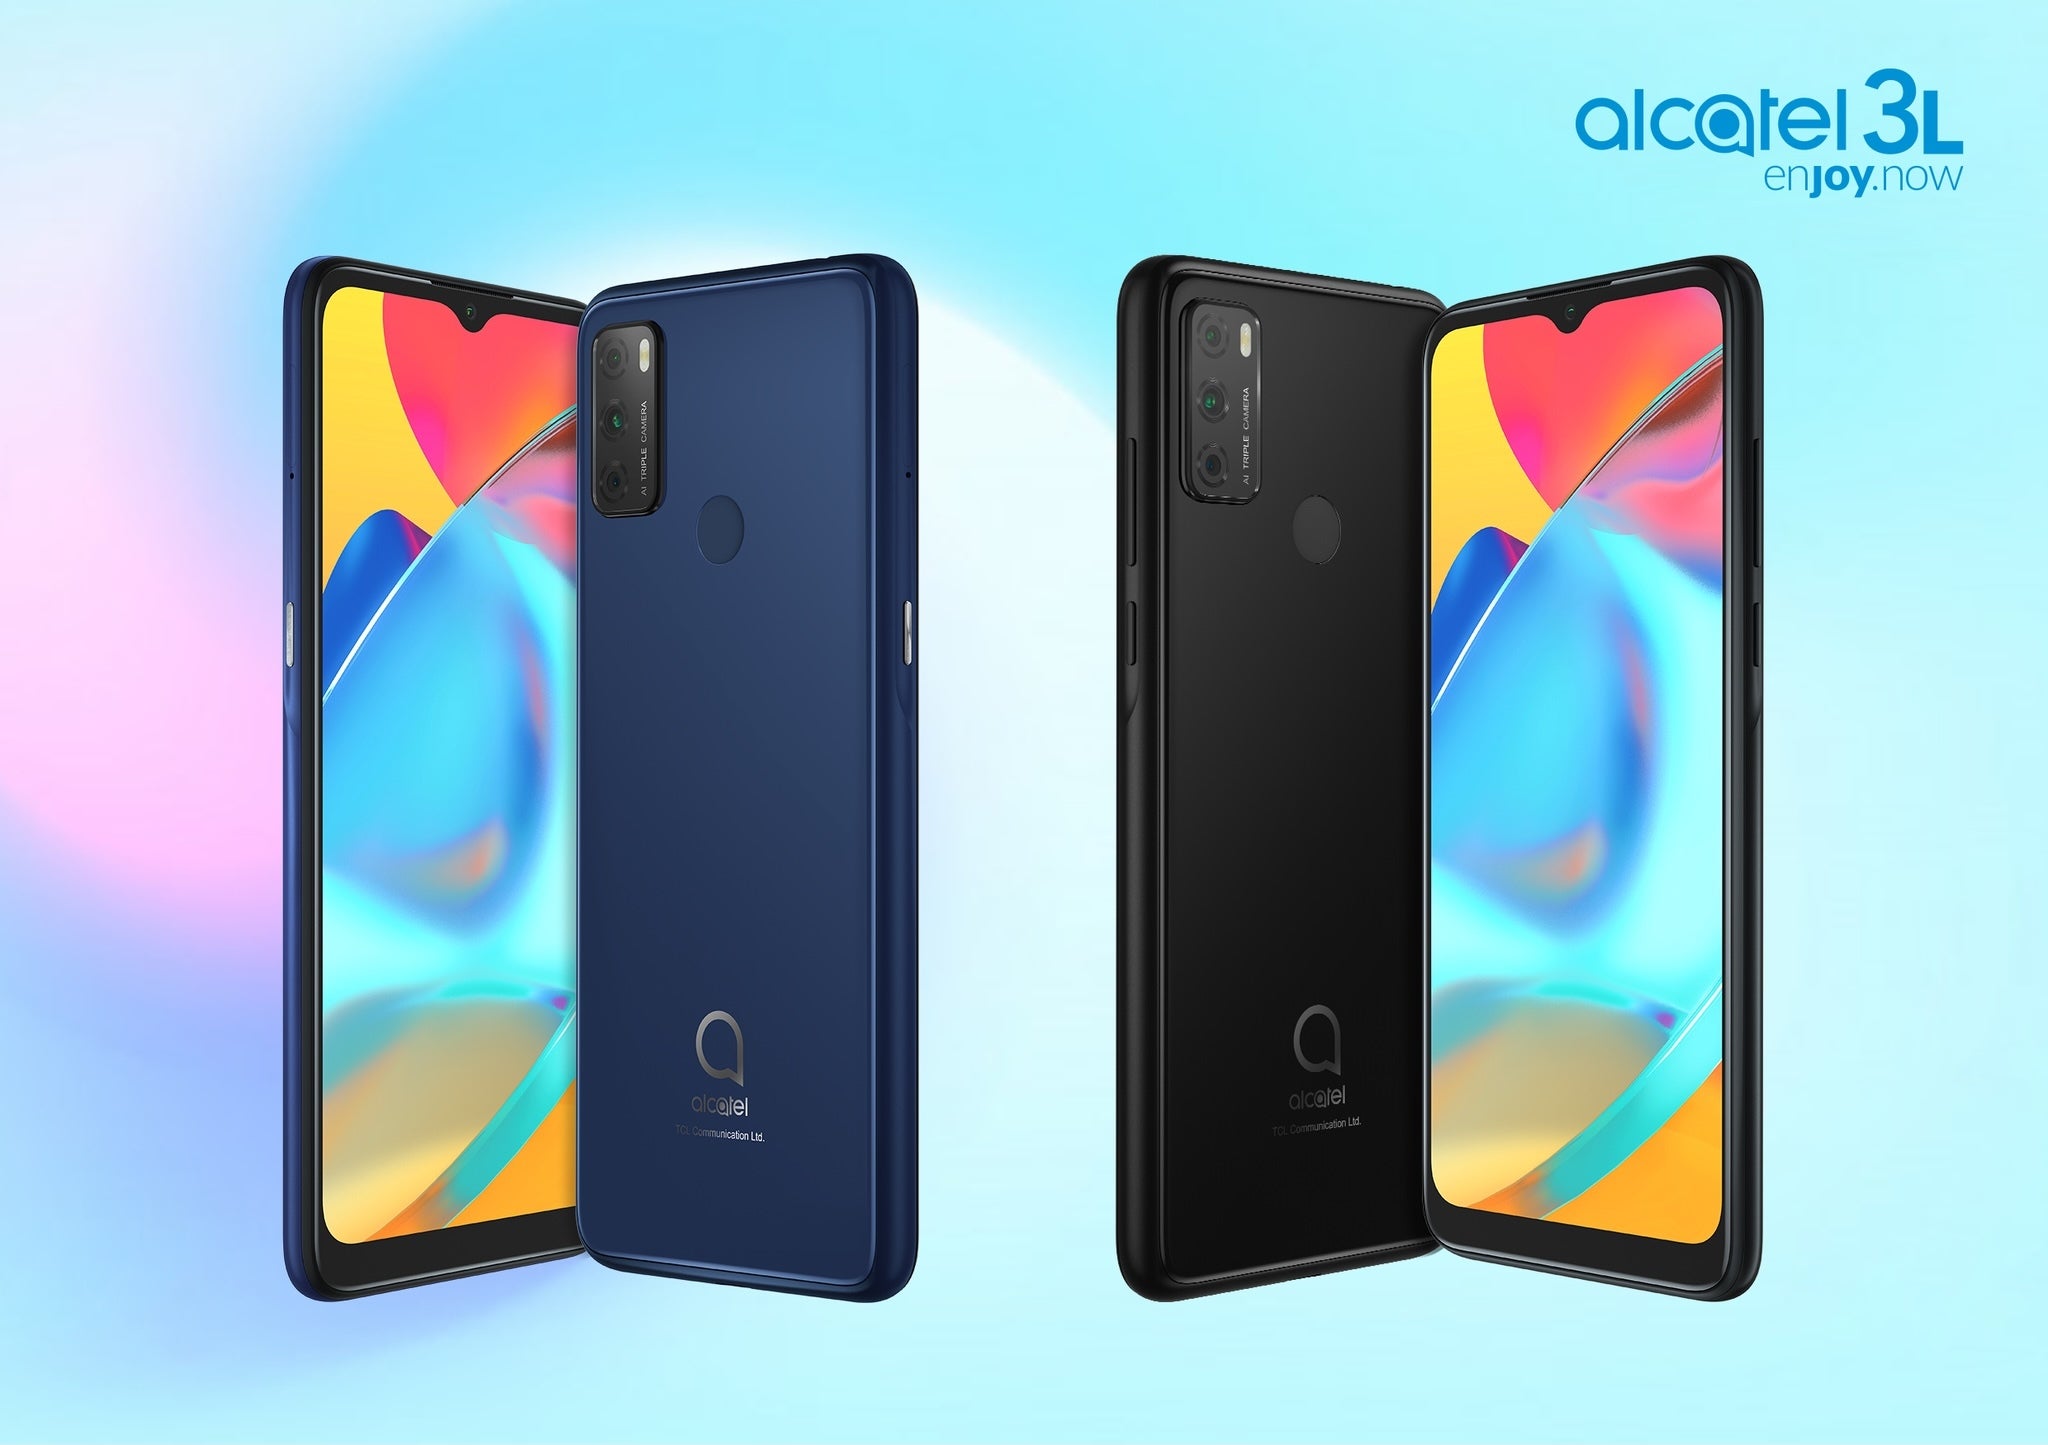 The Alcatel 3L comes in Jewelry Blue and Jewelry Black - Alcatel introduces a range of super cheap smartphones